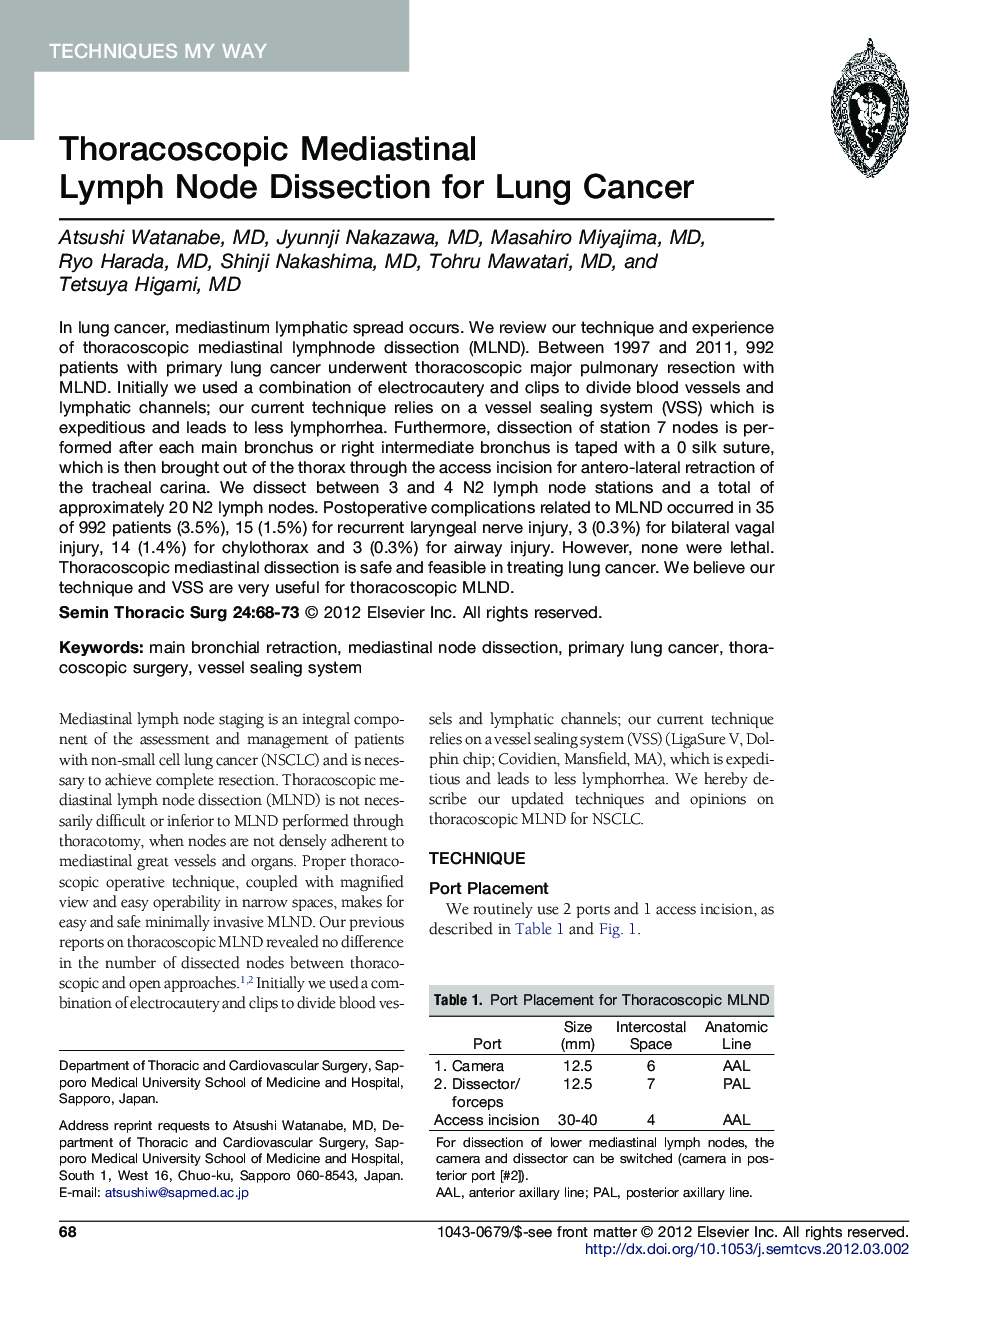 Thoracoscopic Mediastinal Lymph Node Dissection for Lung Cancer